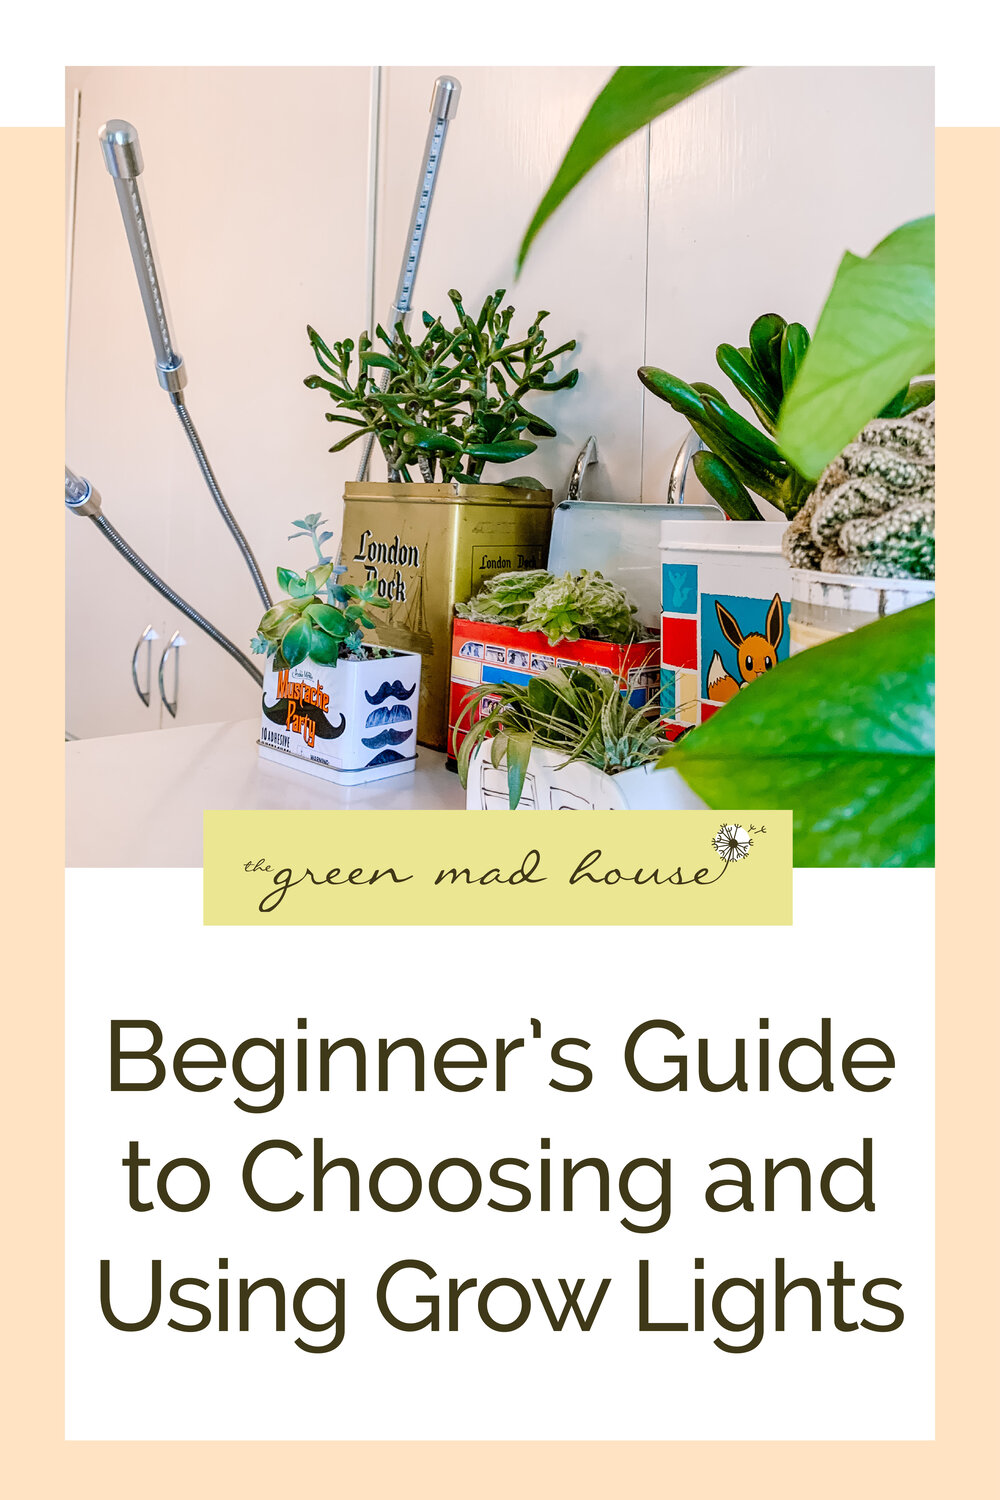 Beginner's Guide to Choosing and Using Grow Lights